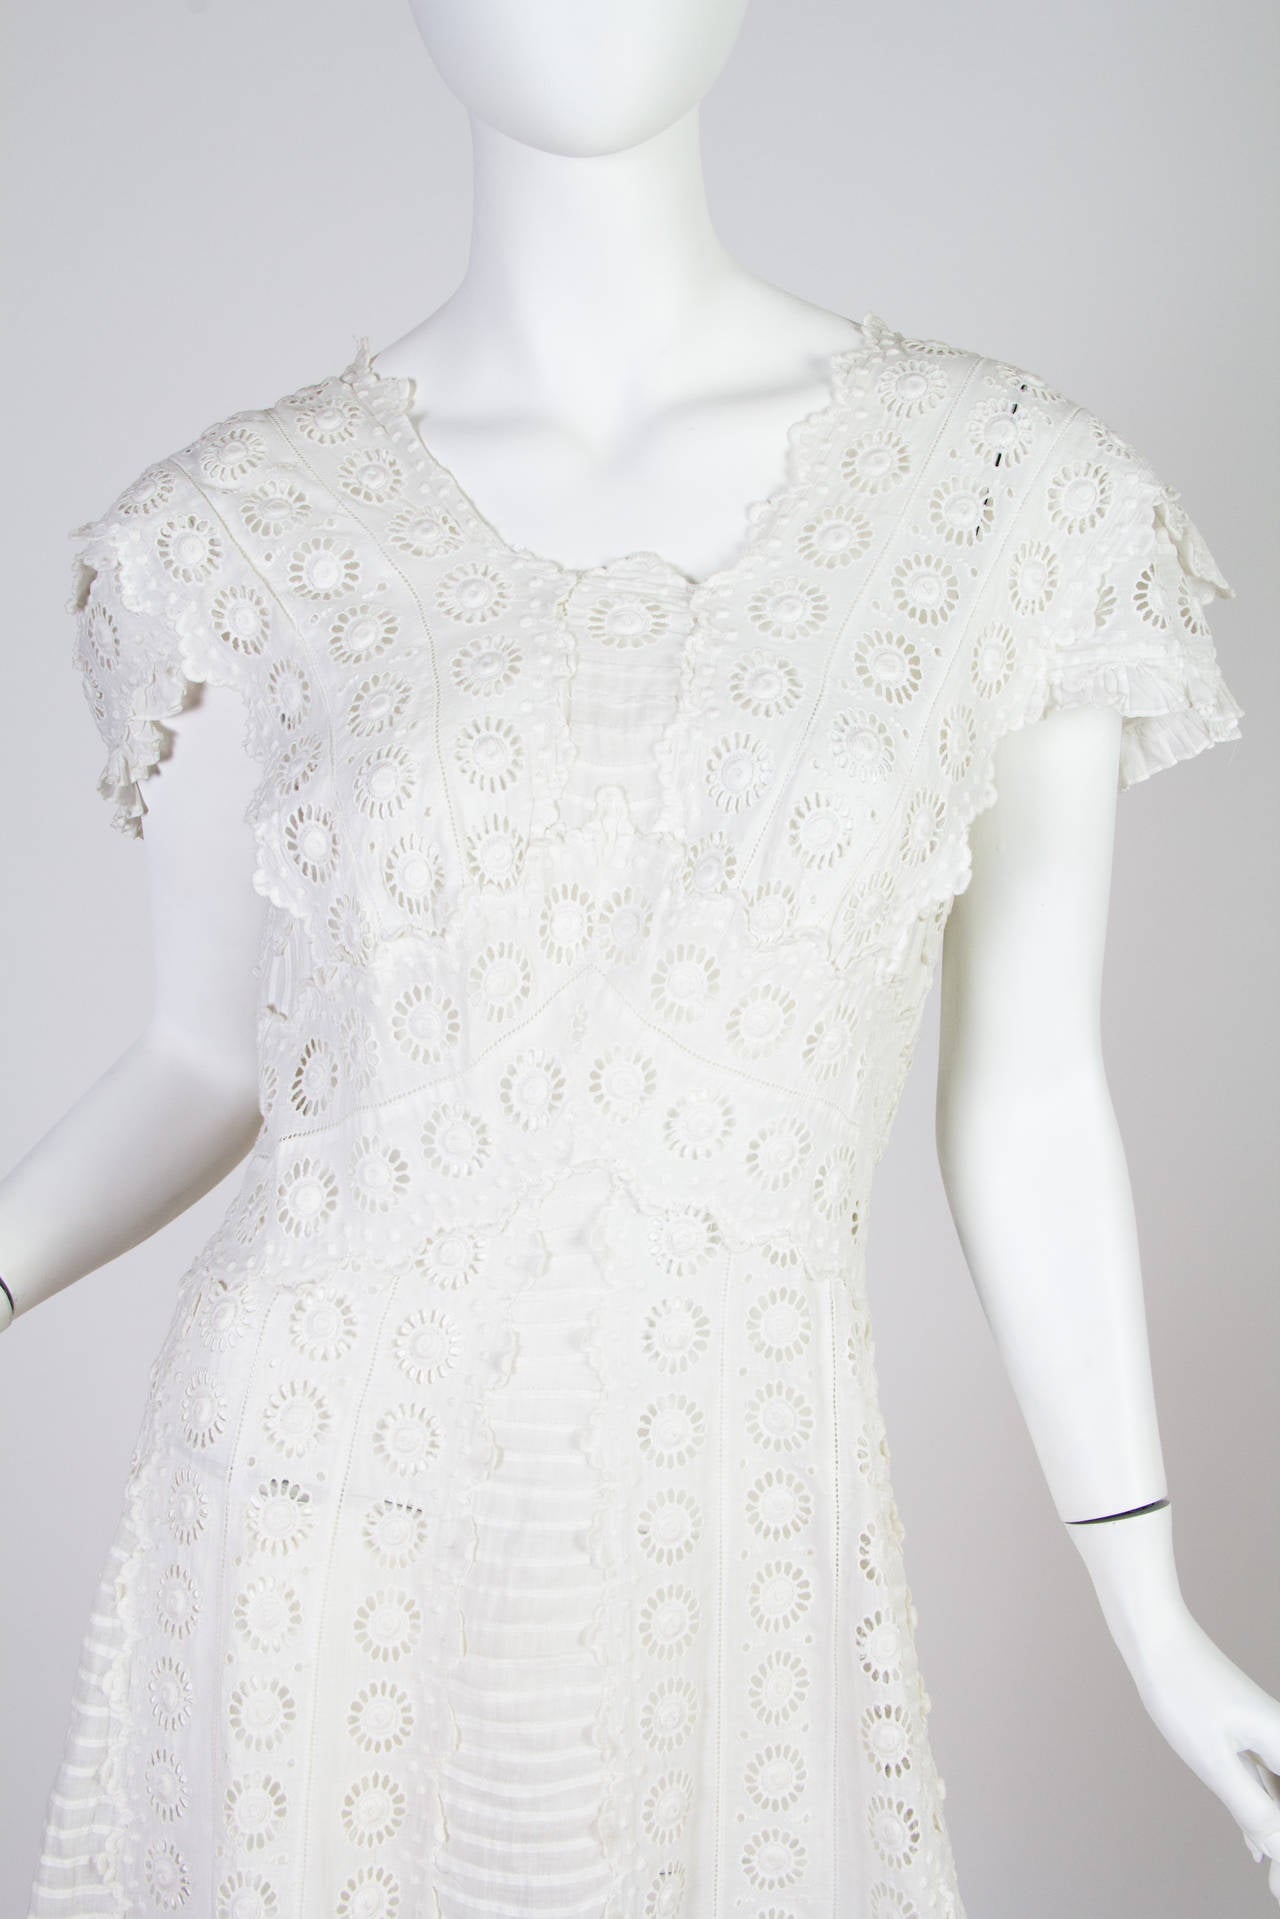 Teens Antique Embroidered Eyelet and Pintucked Lace Tea Dress 1